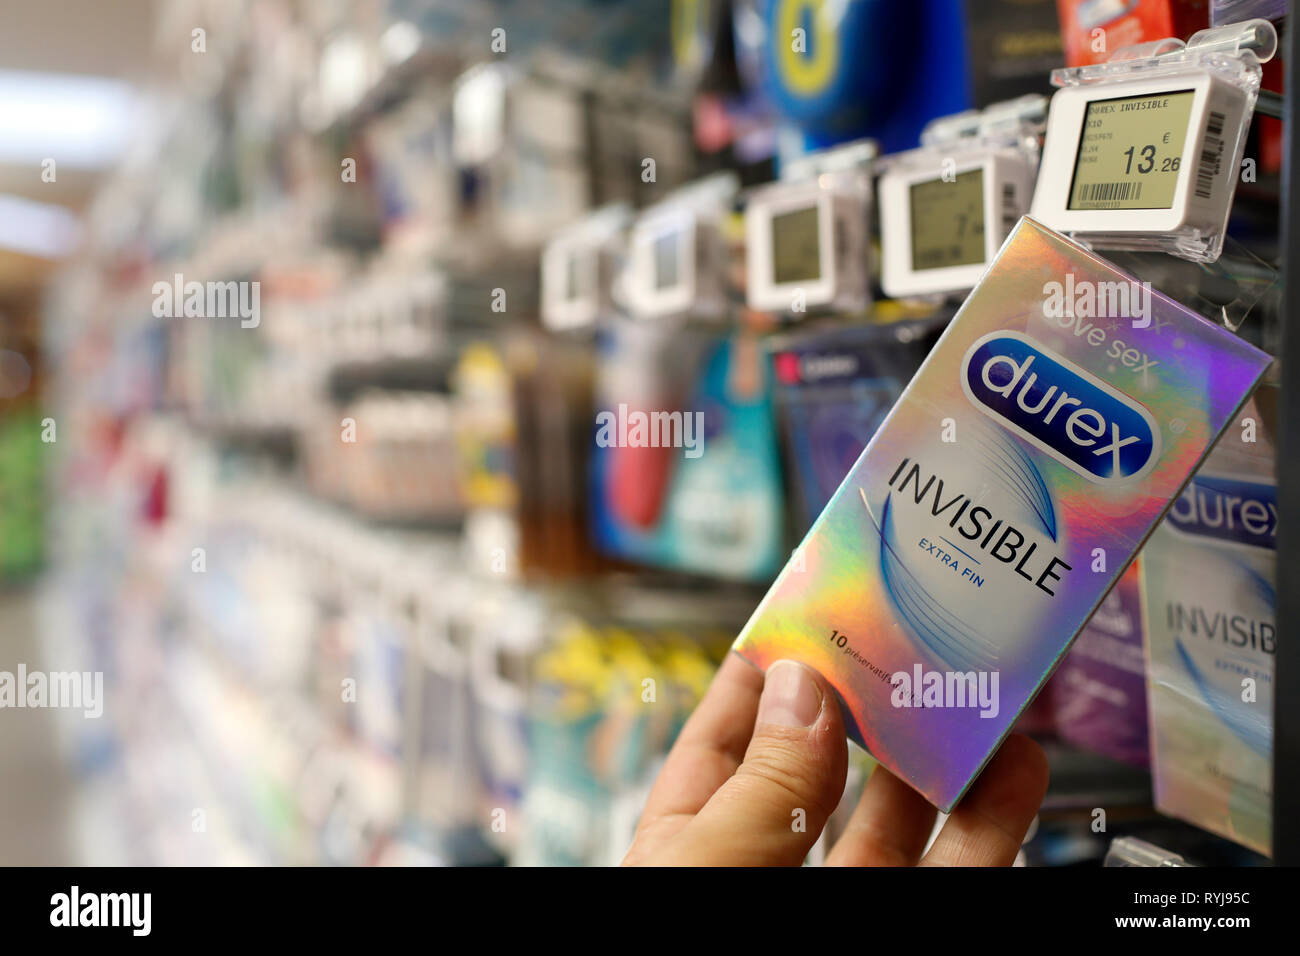 Stalls in row at supermarket.   Parapharmacy products. Condoms. Man shopping.   France. Stock Photo